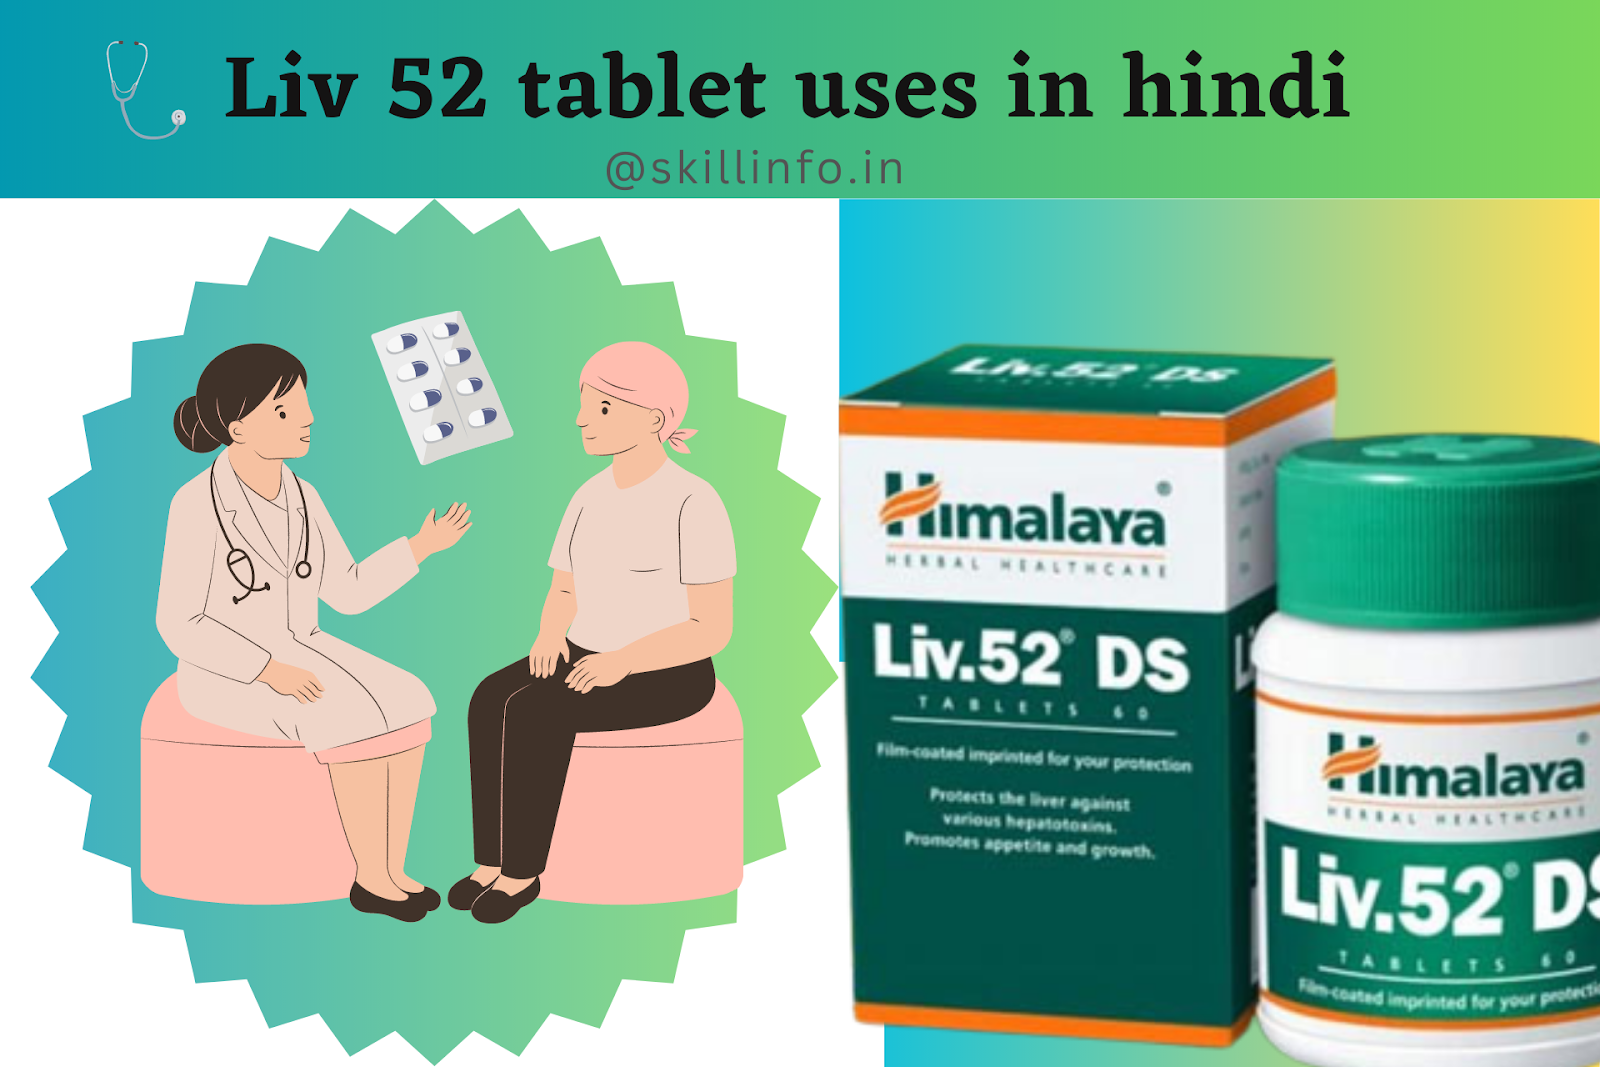 Liv 52 tablet uses in Hindi